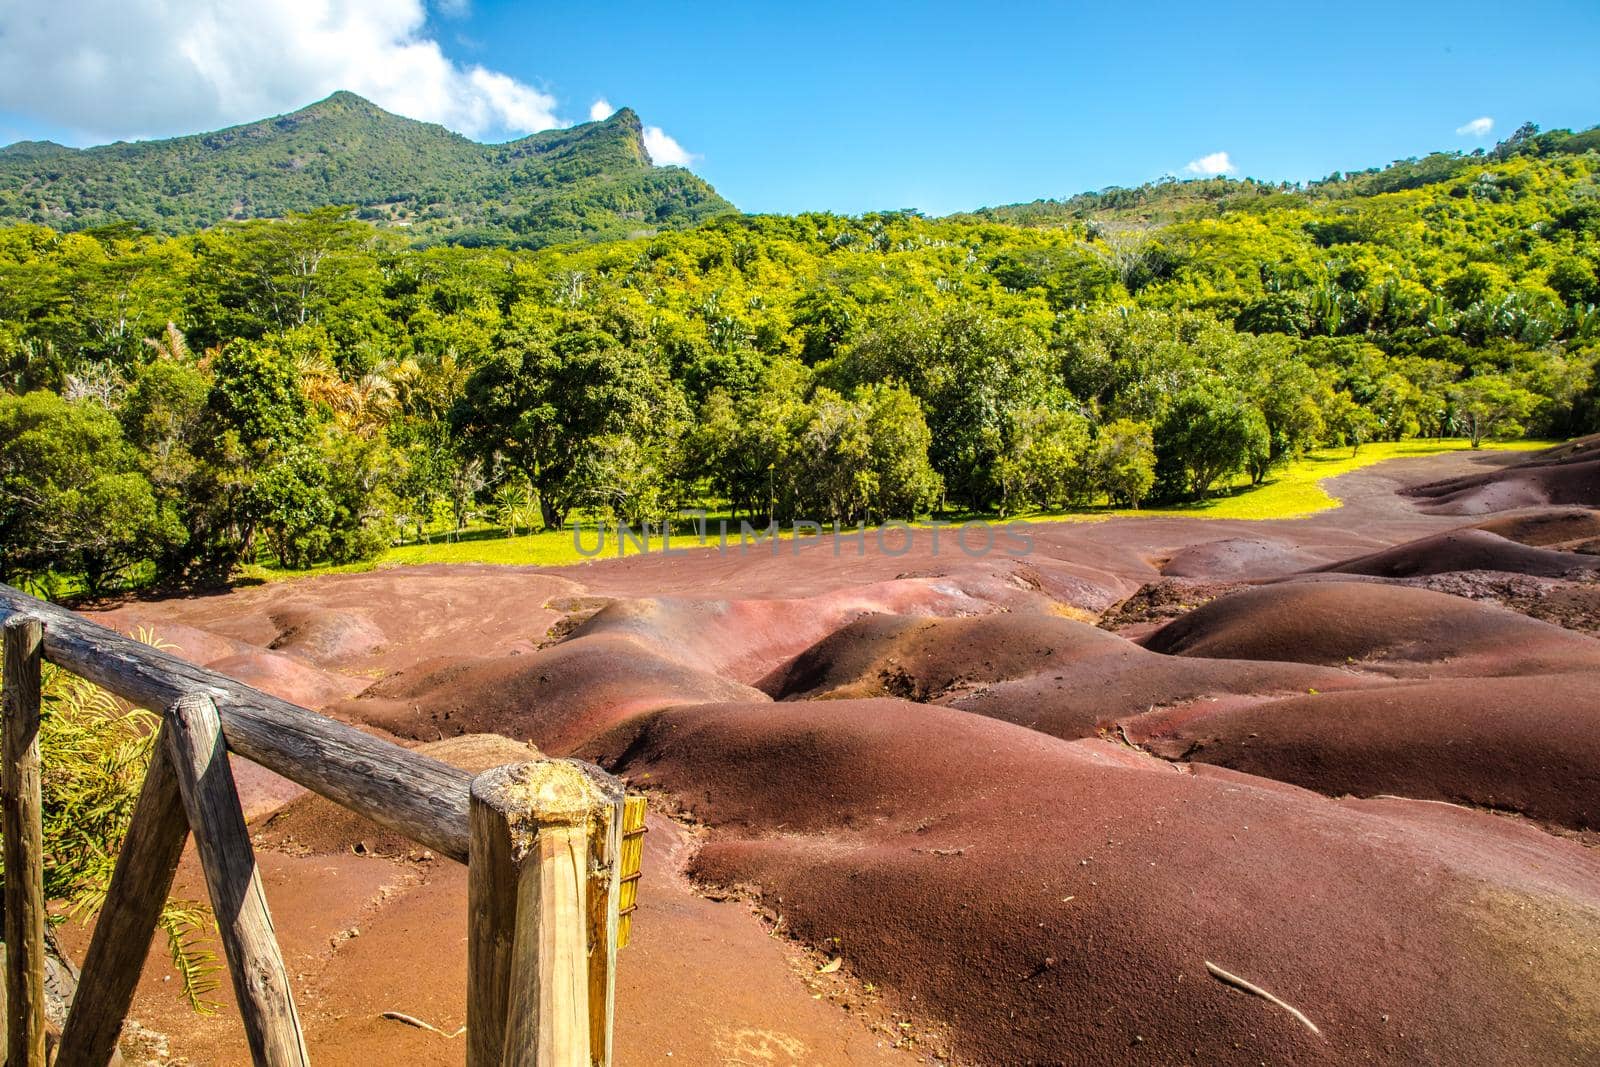 The Seven coloured earths near Chamarel, Mauritius, Africa by Weltblick